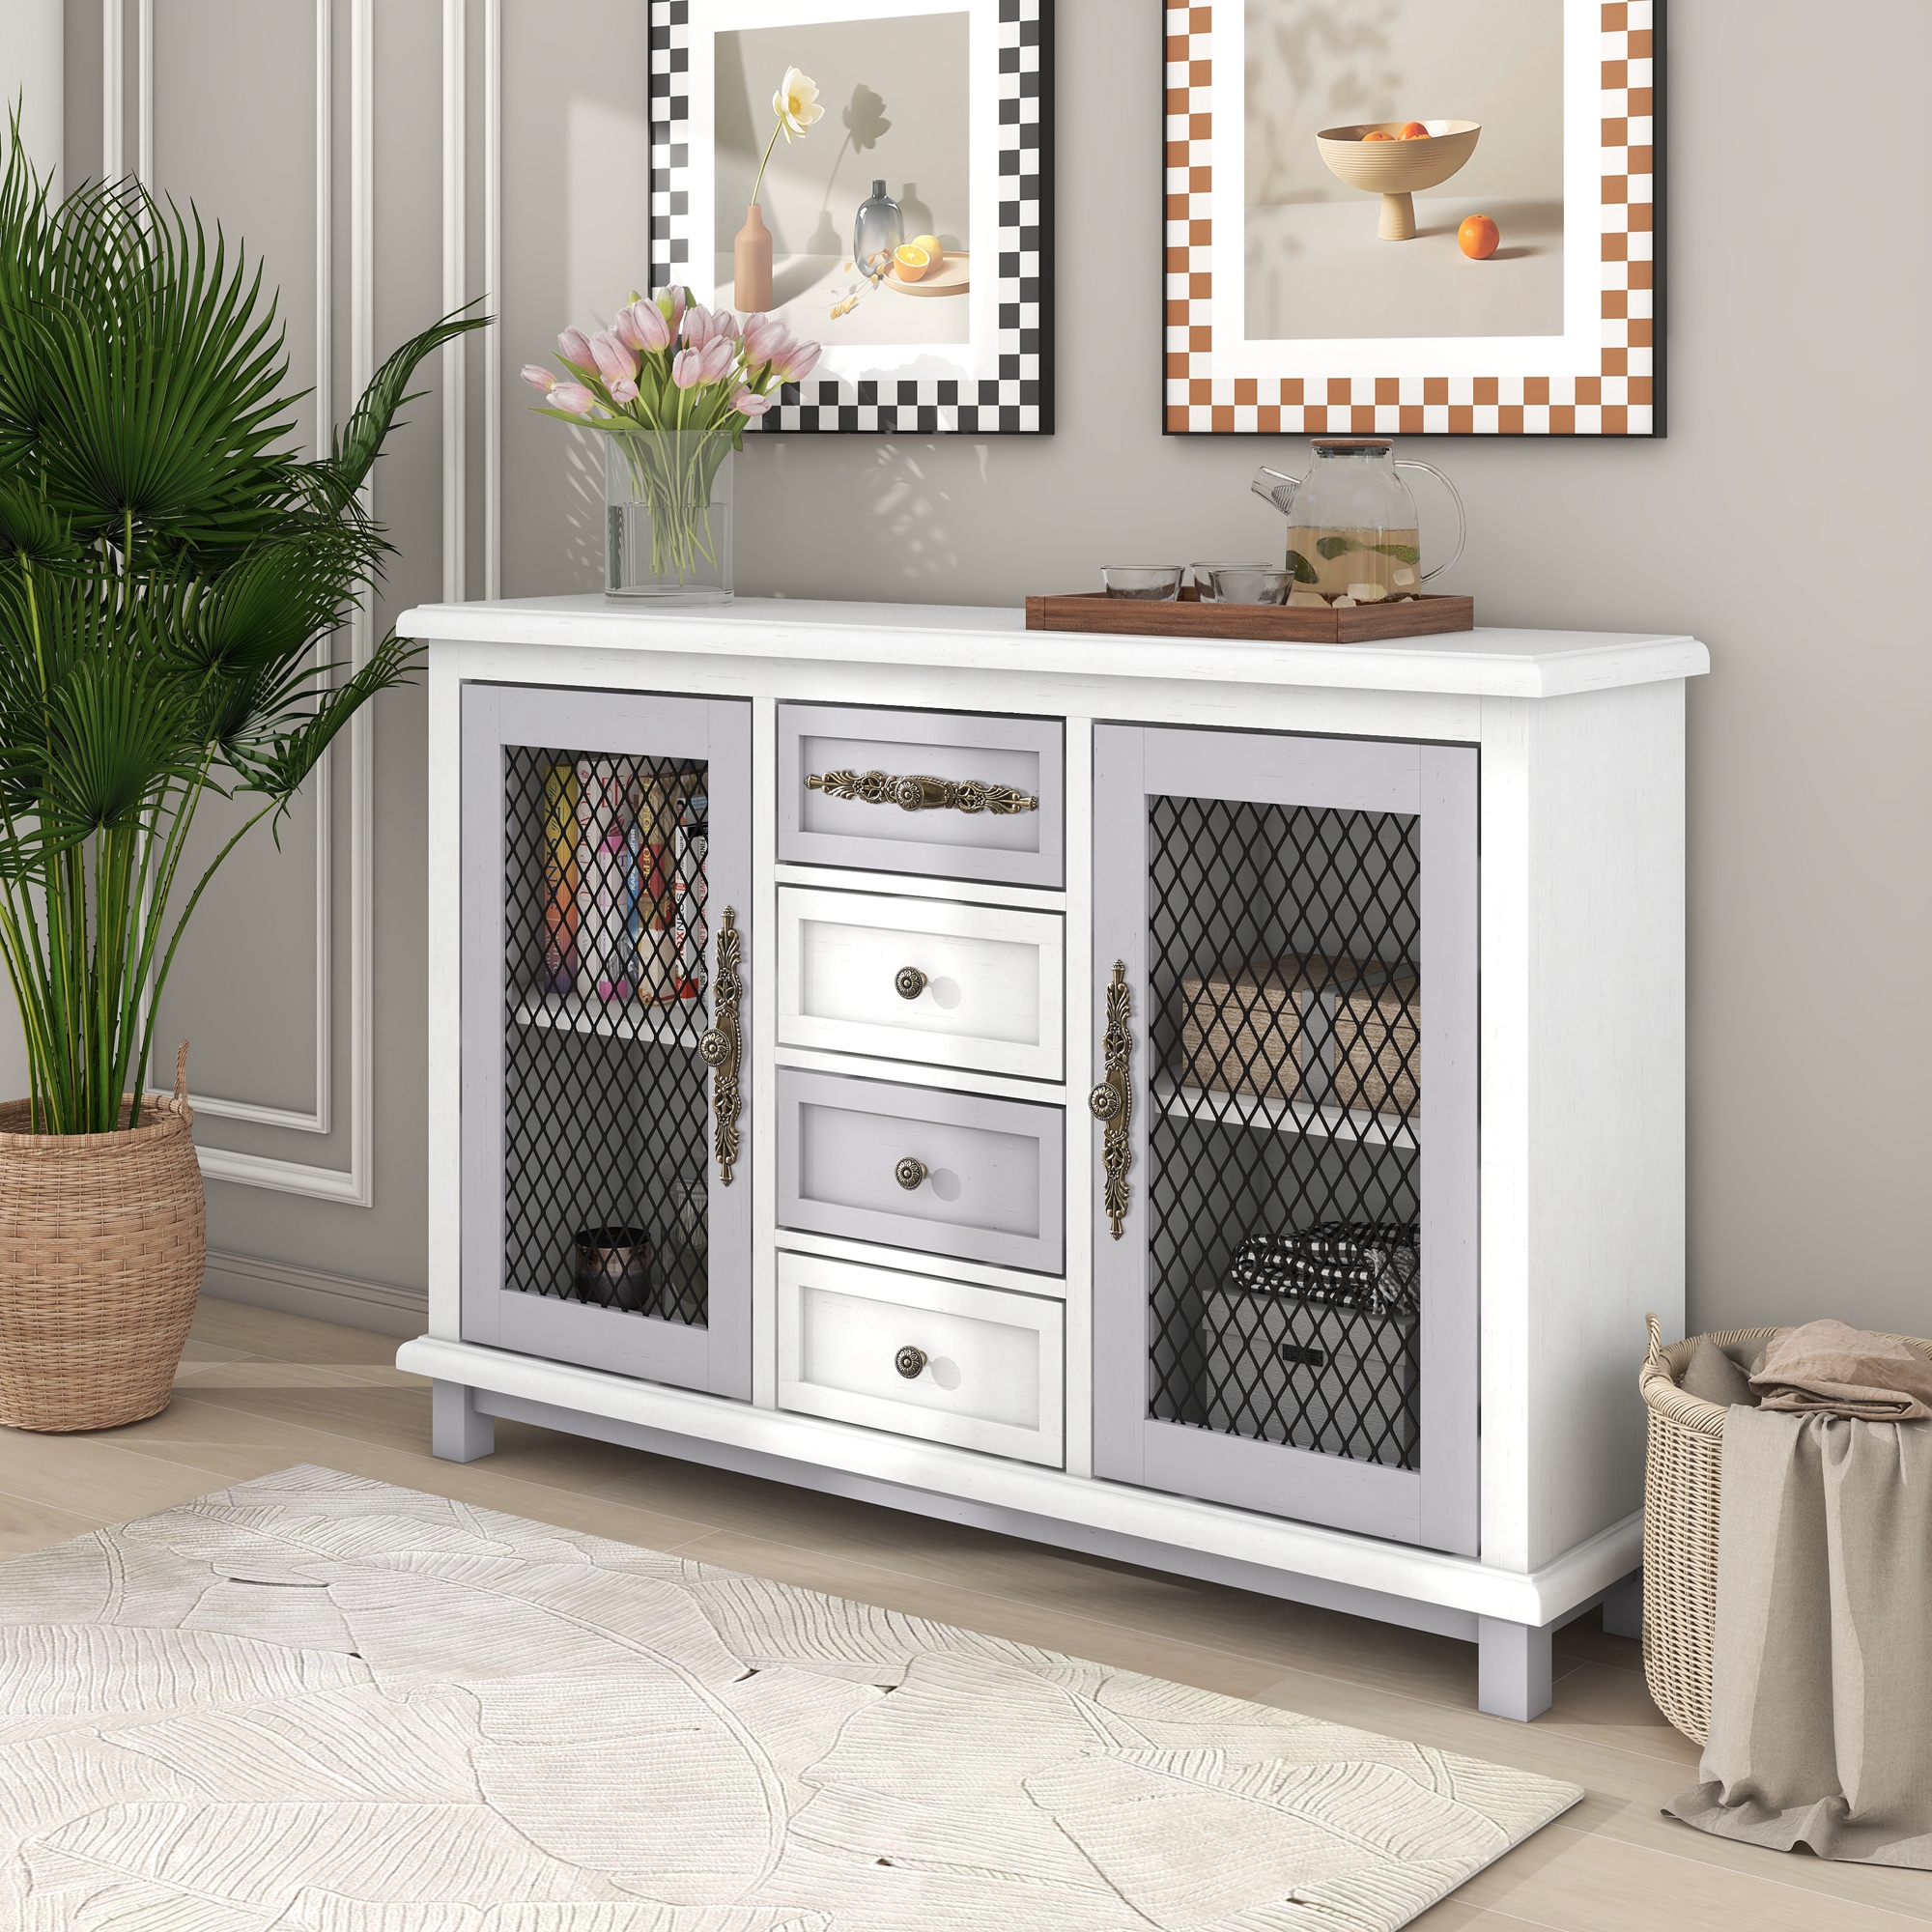 Retro Style Cabinet With 4 Drawers And 2 Iron Mesh Doors - WF294857AAA